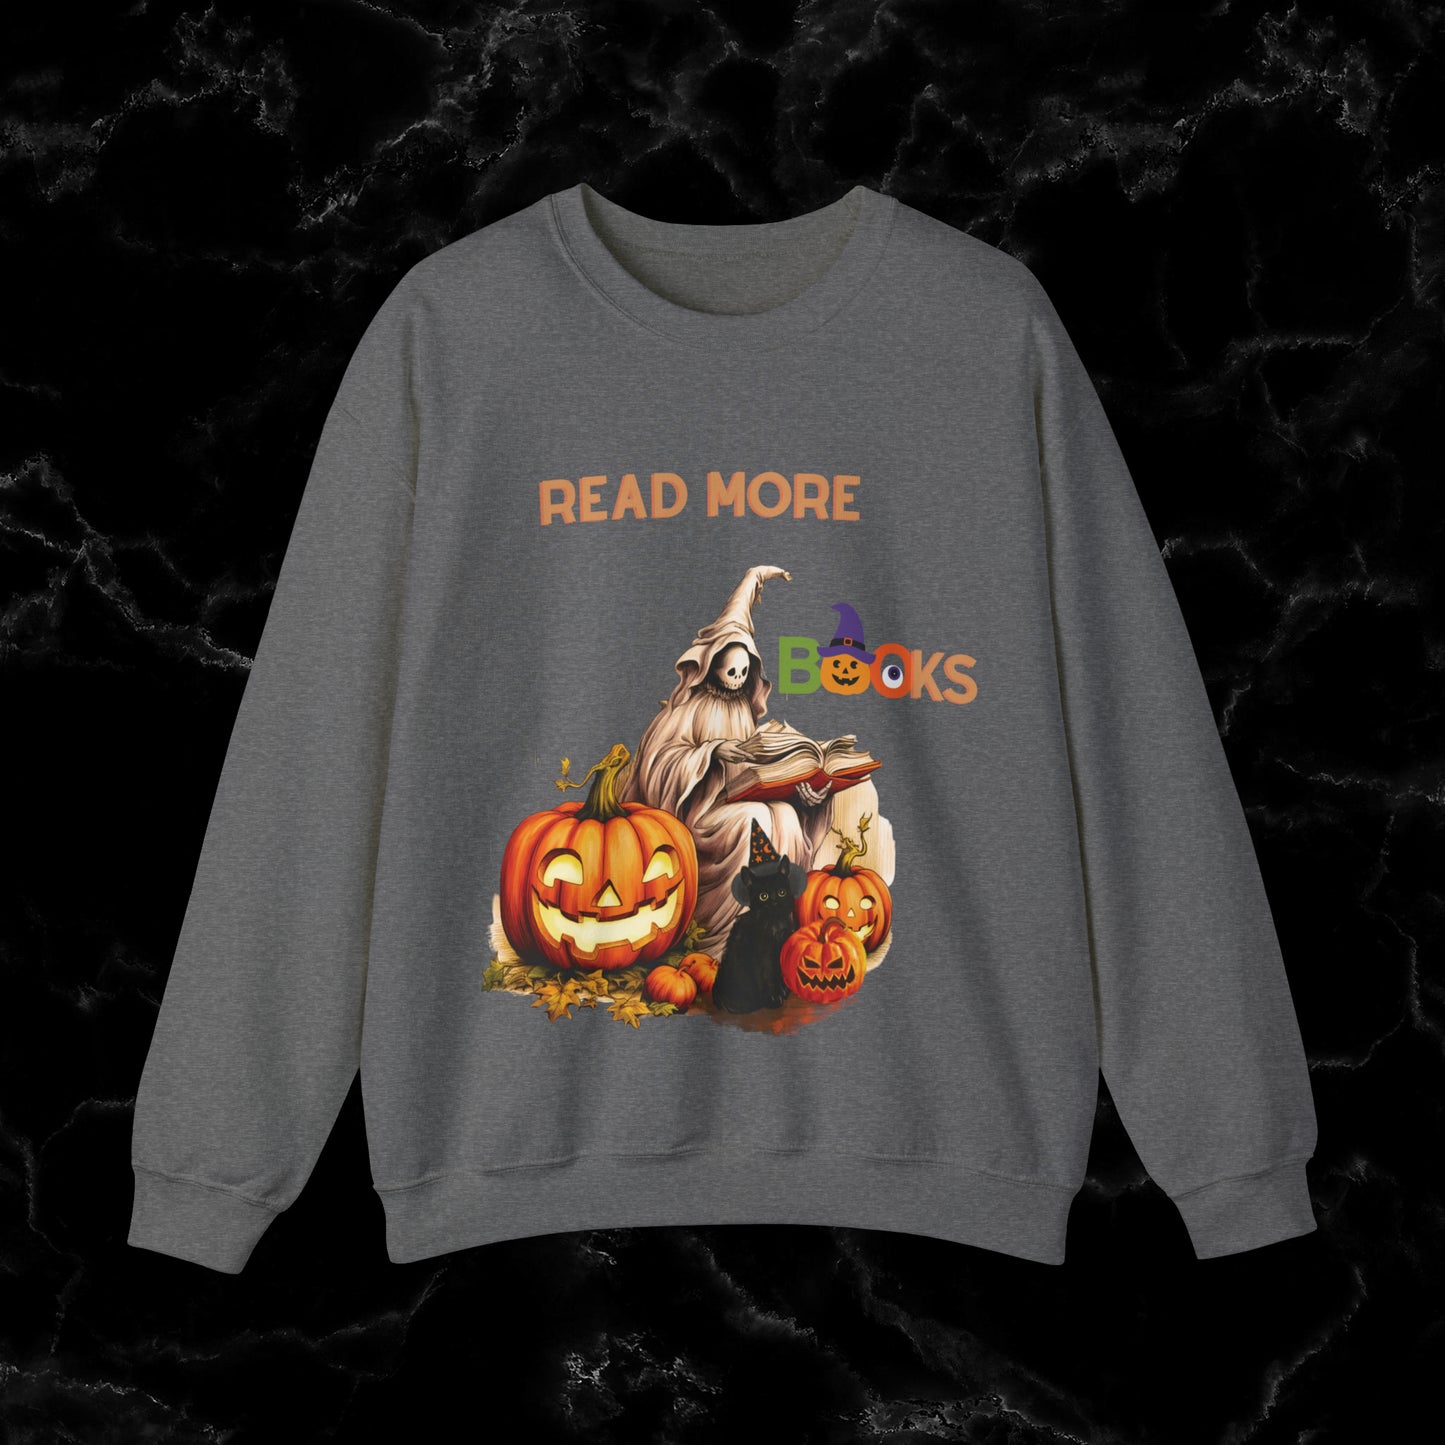 Read More Books Sweatshirt - Book Lover Halloween Sweater for Librarians and Students Sweatshirt S Graphite Heather 